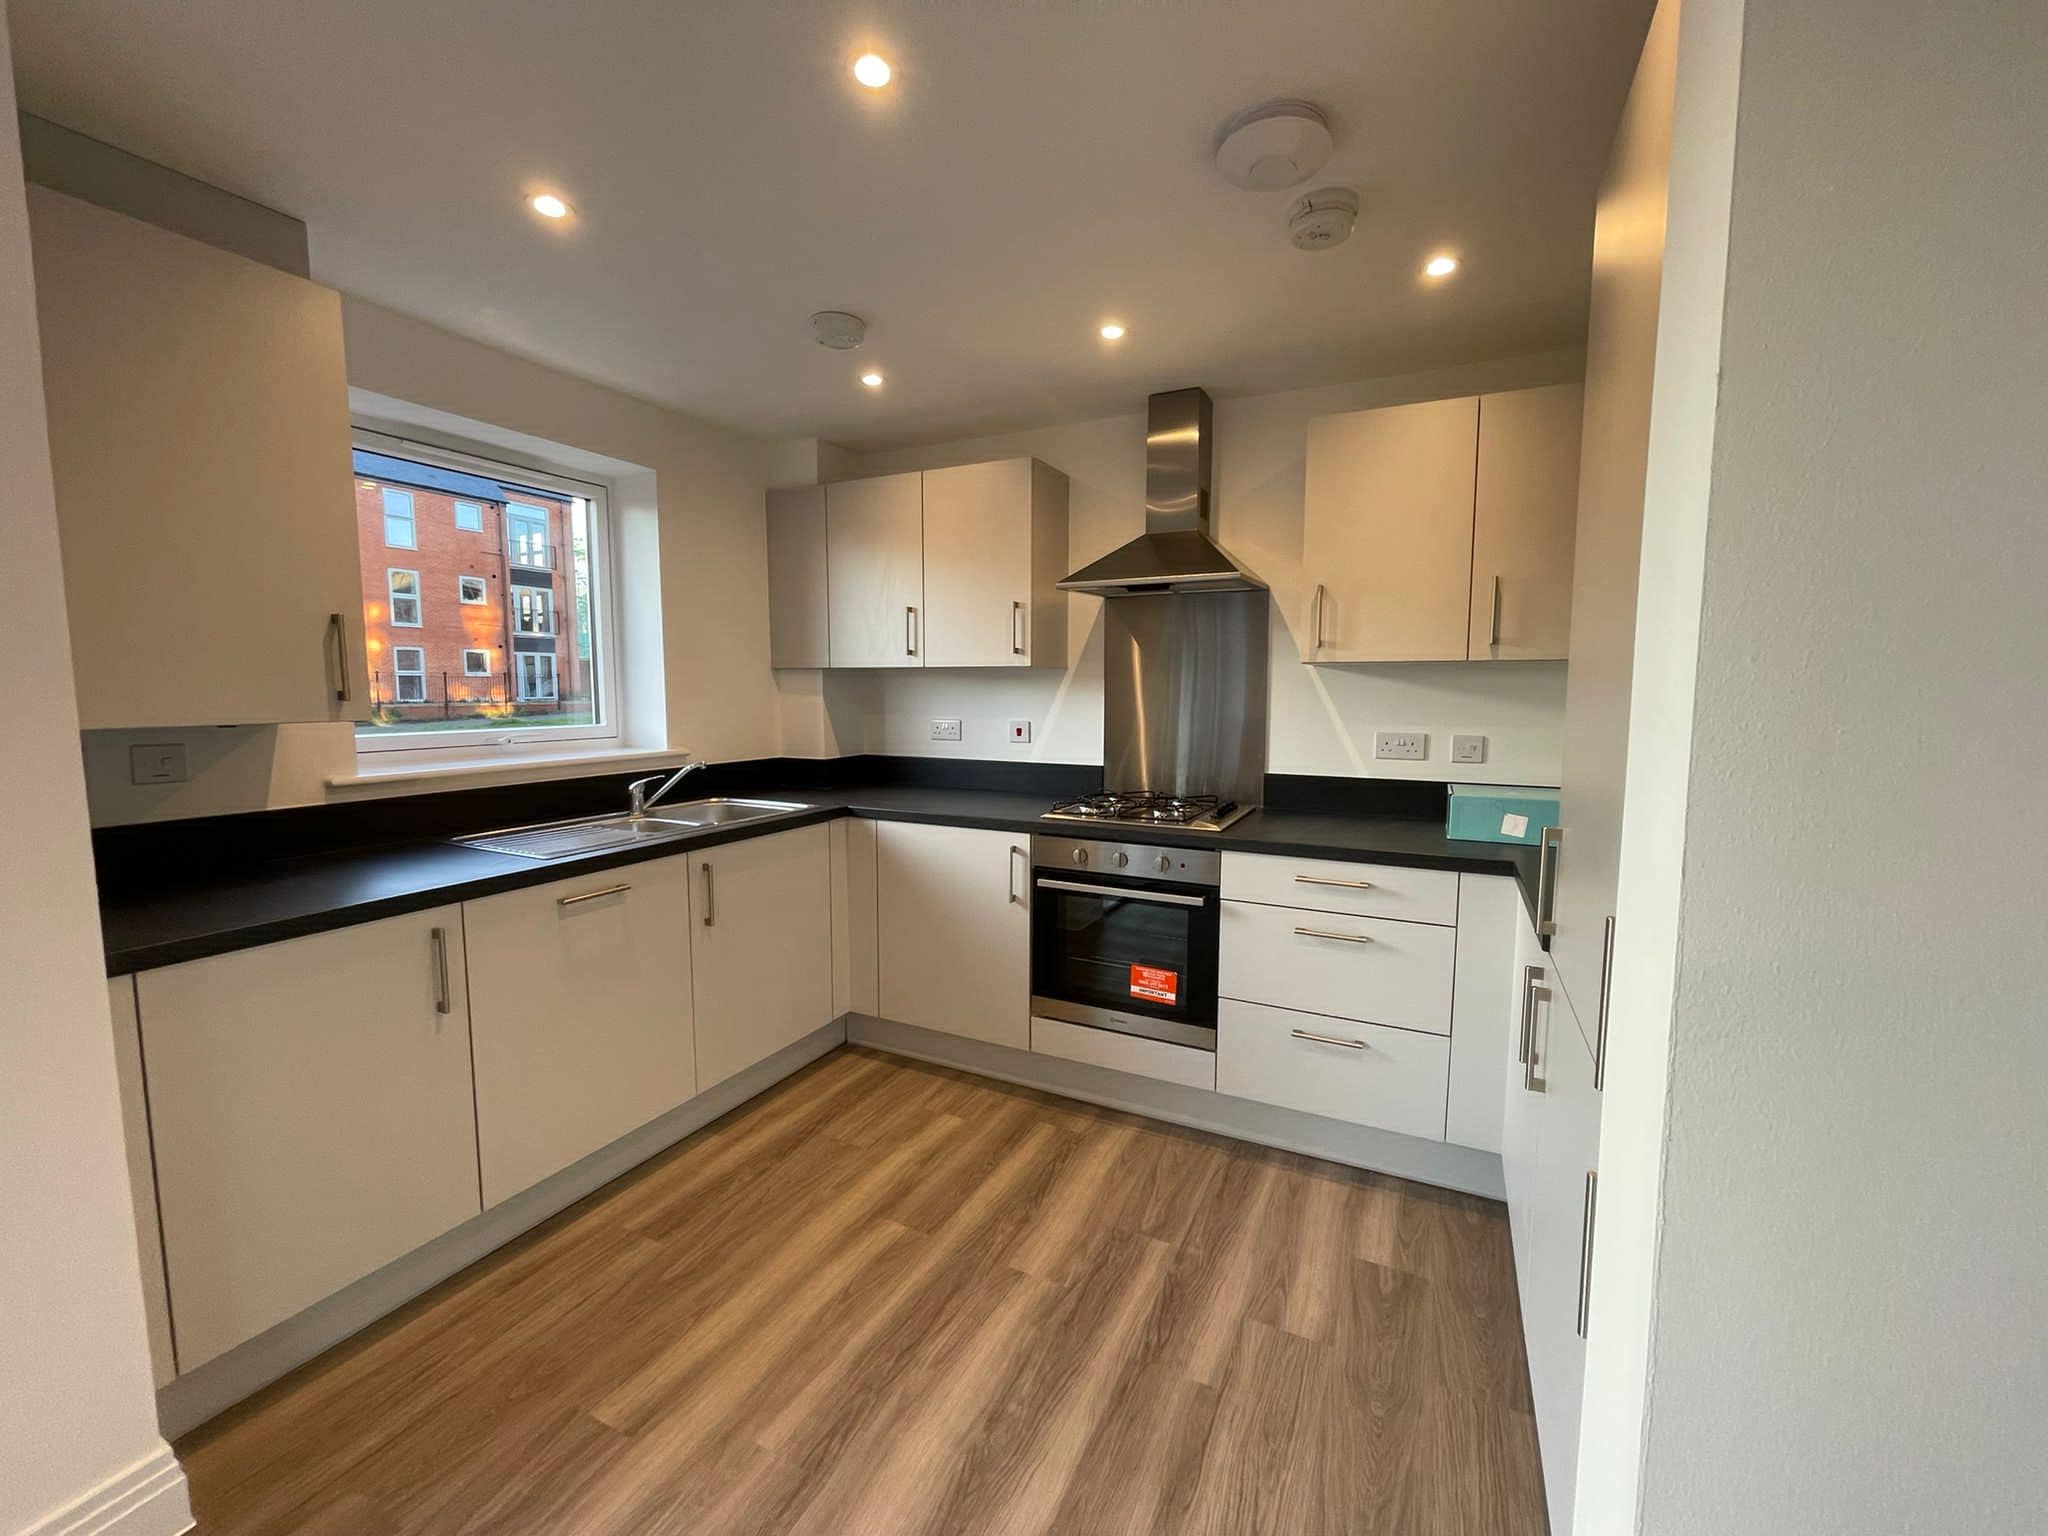 An image of a kitchen at Kings Barton by Persona Homes - available to purchase through Shared Ownership on Share to Buy!